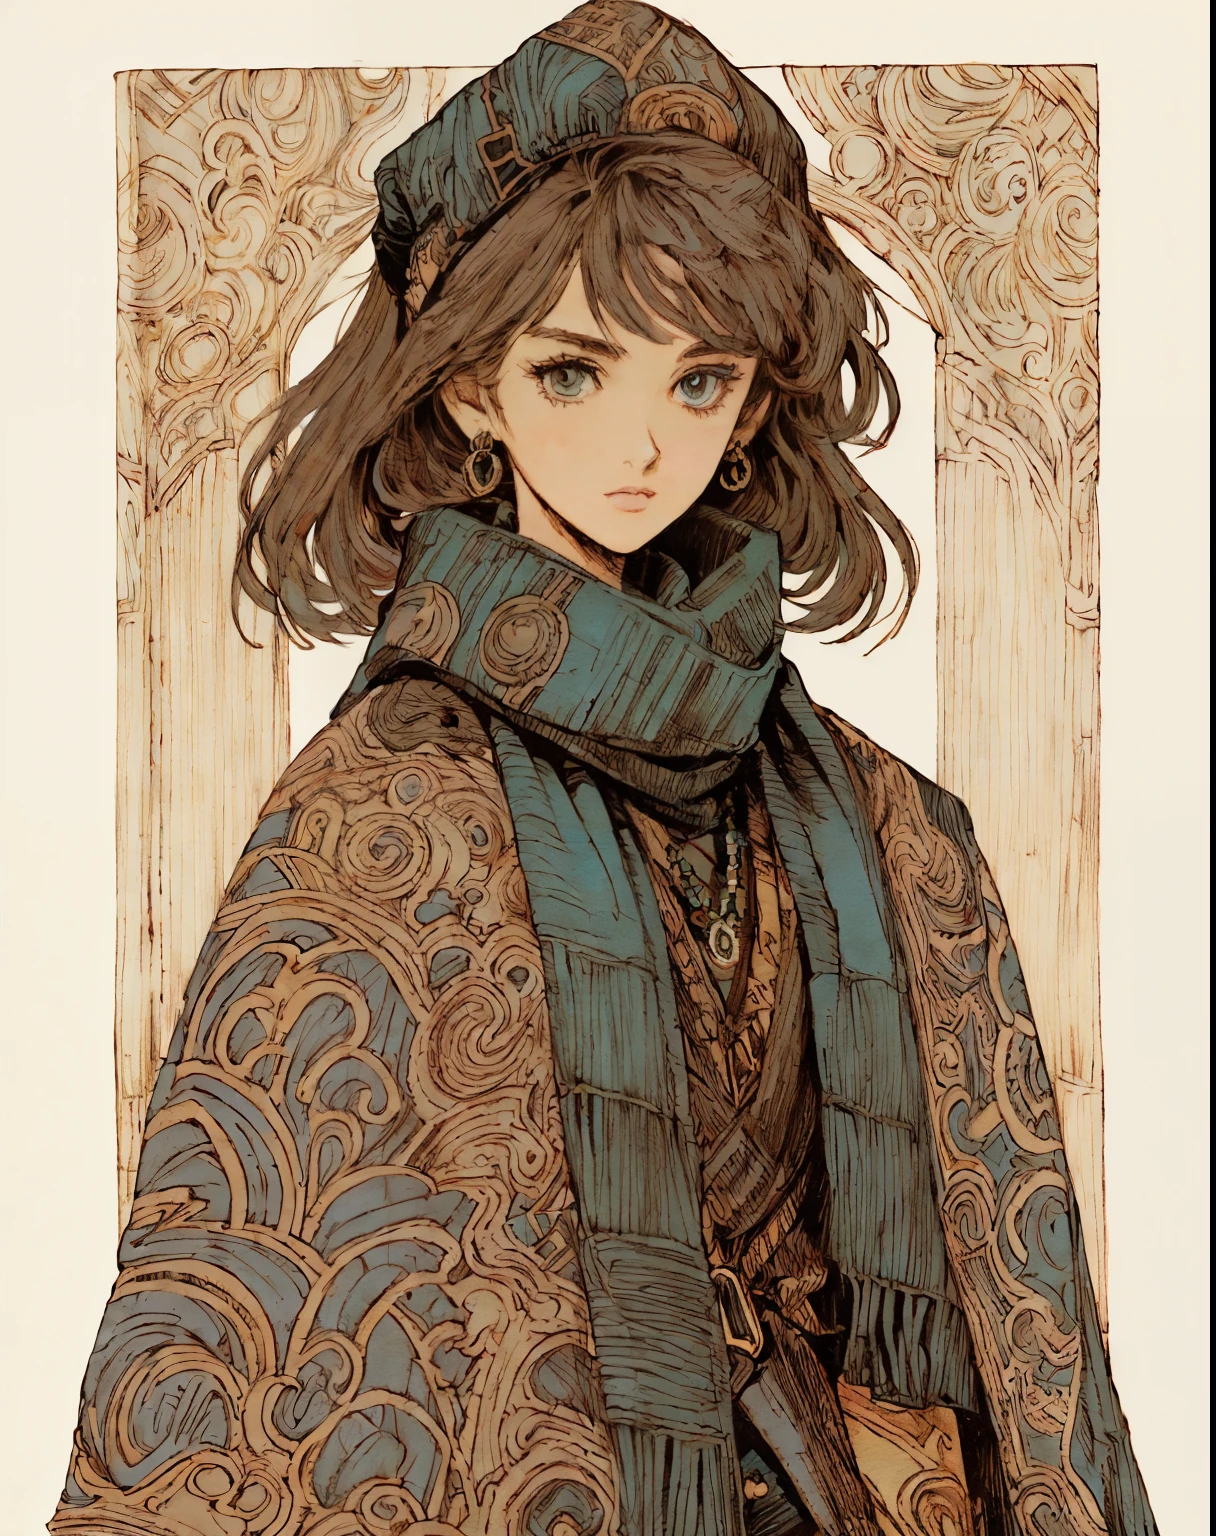 muted color, 1 short person, Final Fantasy mimic character class, wrapped in patchwork patterned scarves and quilts, cross wrapped scarves, many layers of scarves and quilts, large beads and tassels, body and face wrapped in various patterned quilts and scarves. only their eyes are visible, heavy eyeliner, androgynous face, only clothing is wrapped scarves and quilts, ((entire body image: 1.4)), ((dark mysterious elaborate steampunk background: 1.0)), game art book style, pen and ink outline, gauche and watercolor painting, pen and ink outlines and details, Akihiko Yoshida Style art, 8k image, gorgeous artwork, masterful painting, whimsical drawing, ((entire head and body is in view: 1.5)), shoes or boots, 